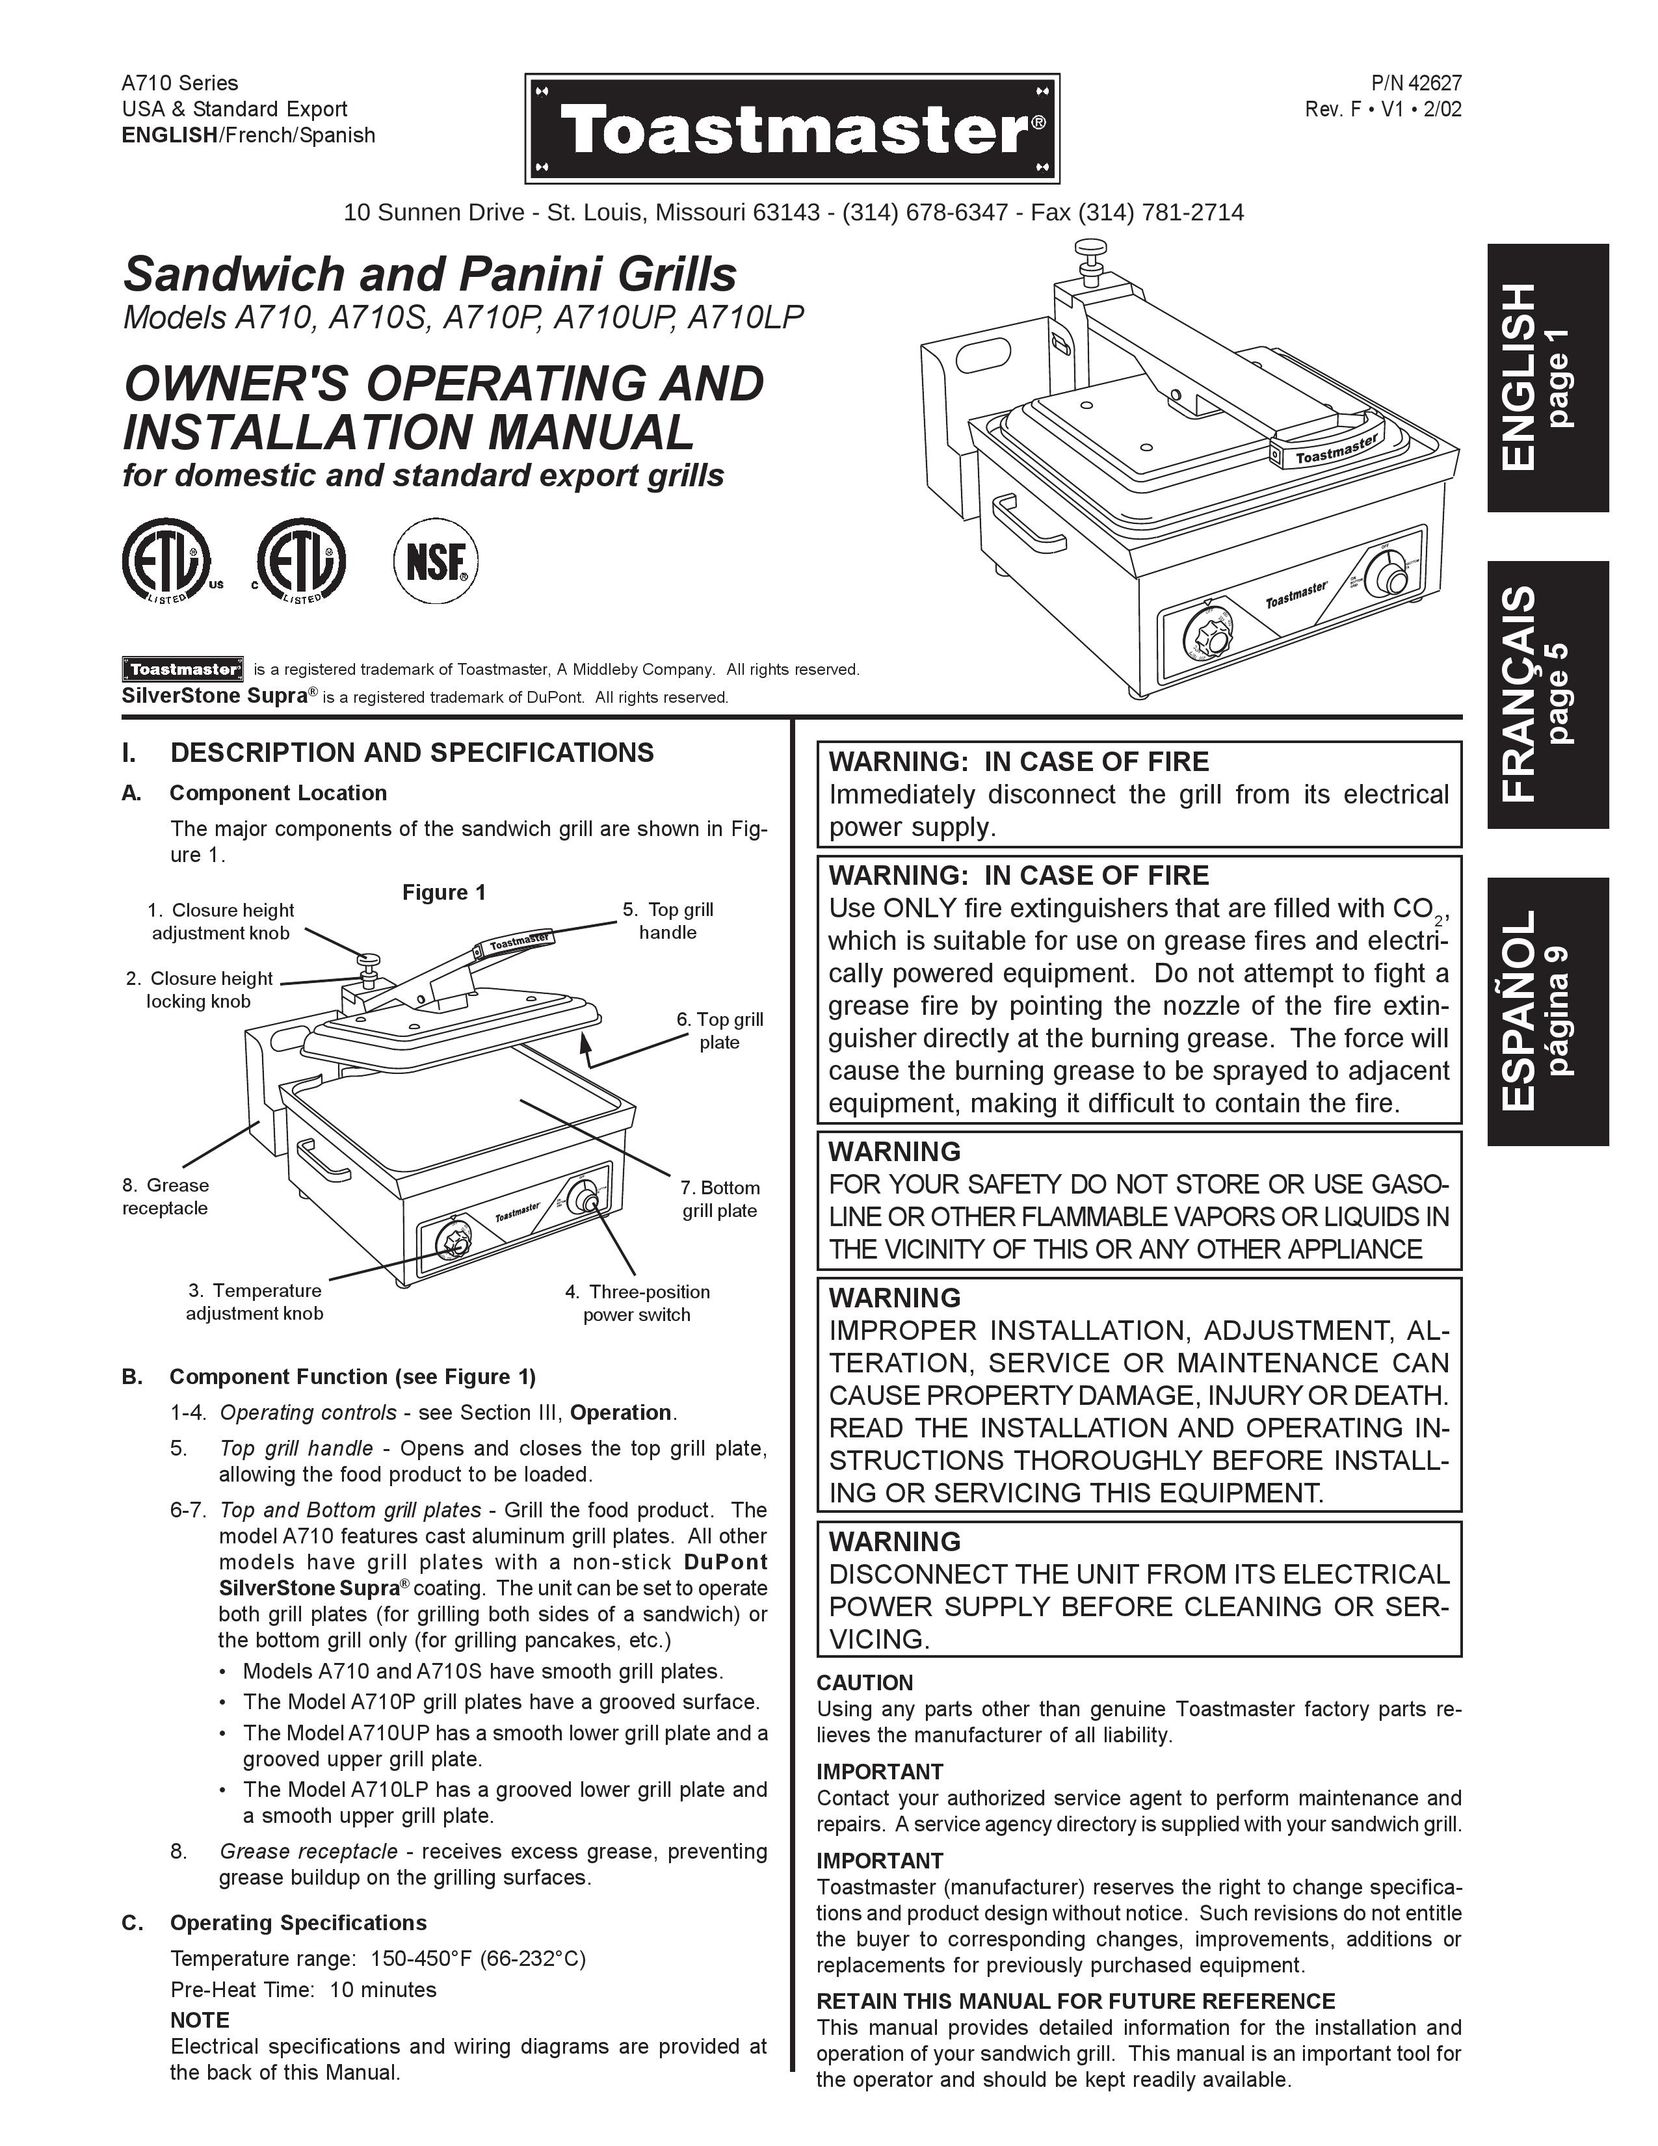 Toastmaster A710S Kitchen Grill User Manual